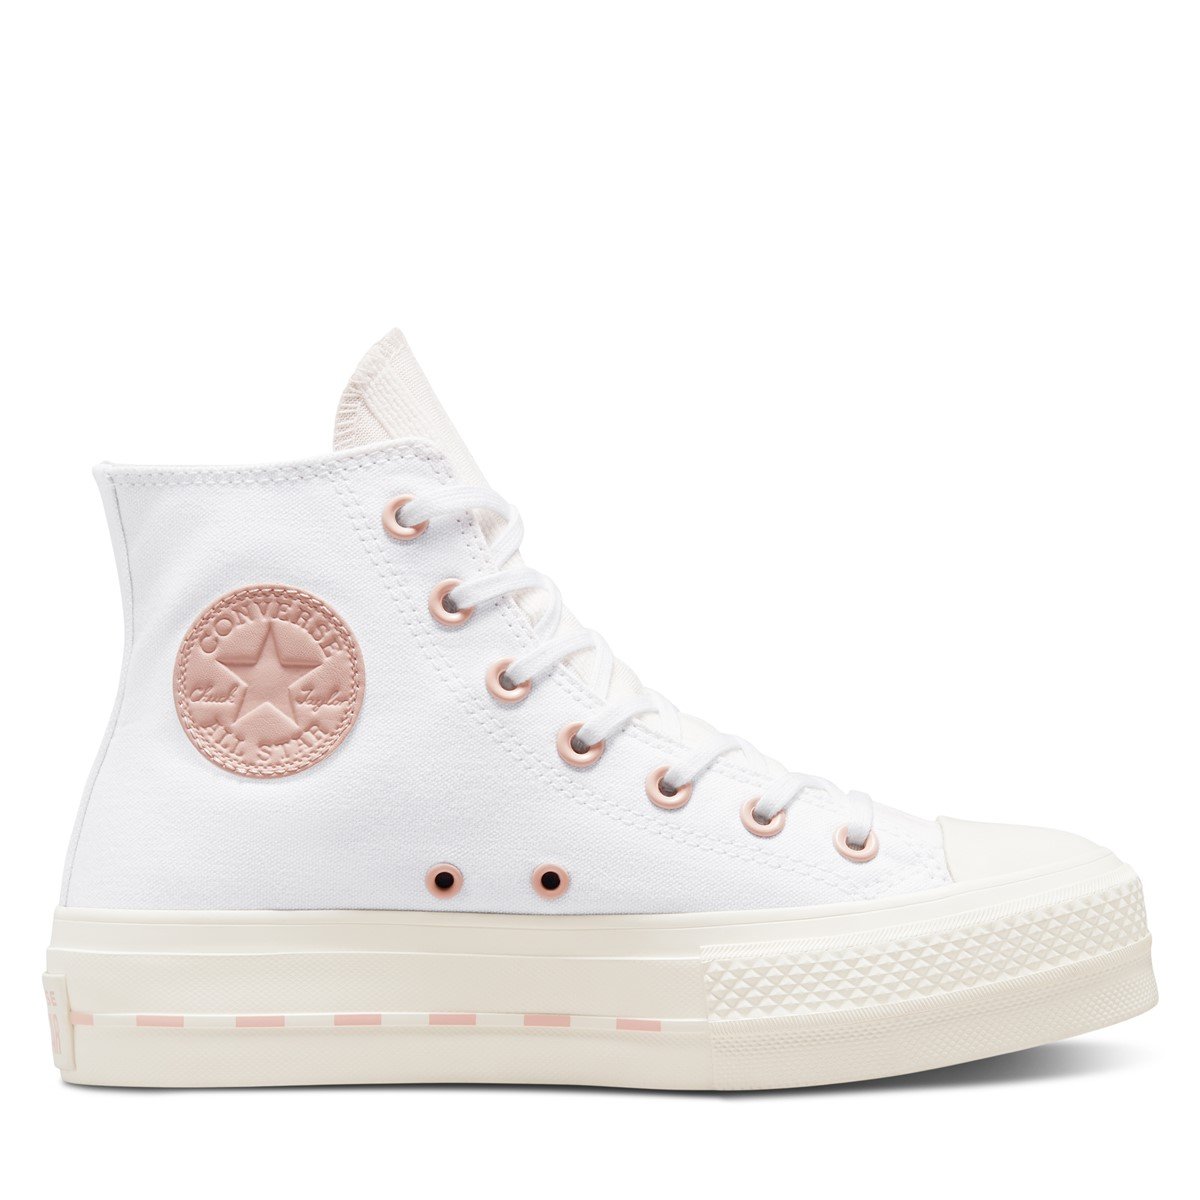 Women's Chuck Taylor All Star Crafted Canvas Lift Platform Hi Sneakers in White/Pink